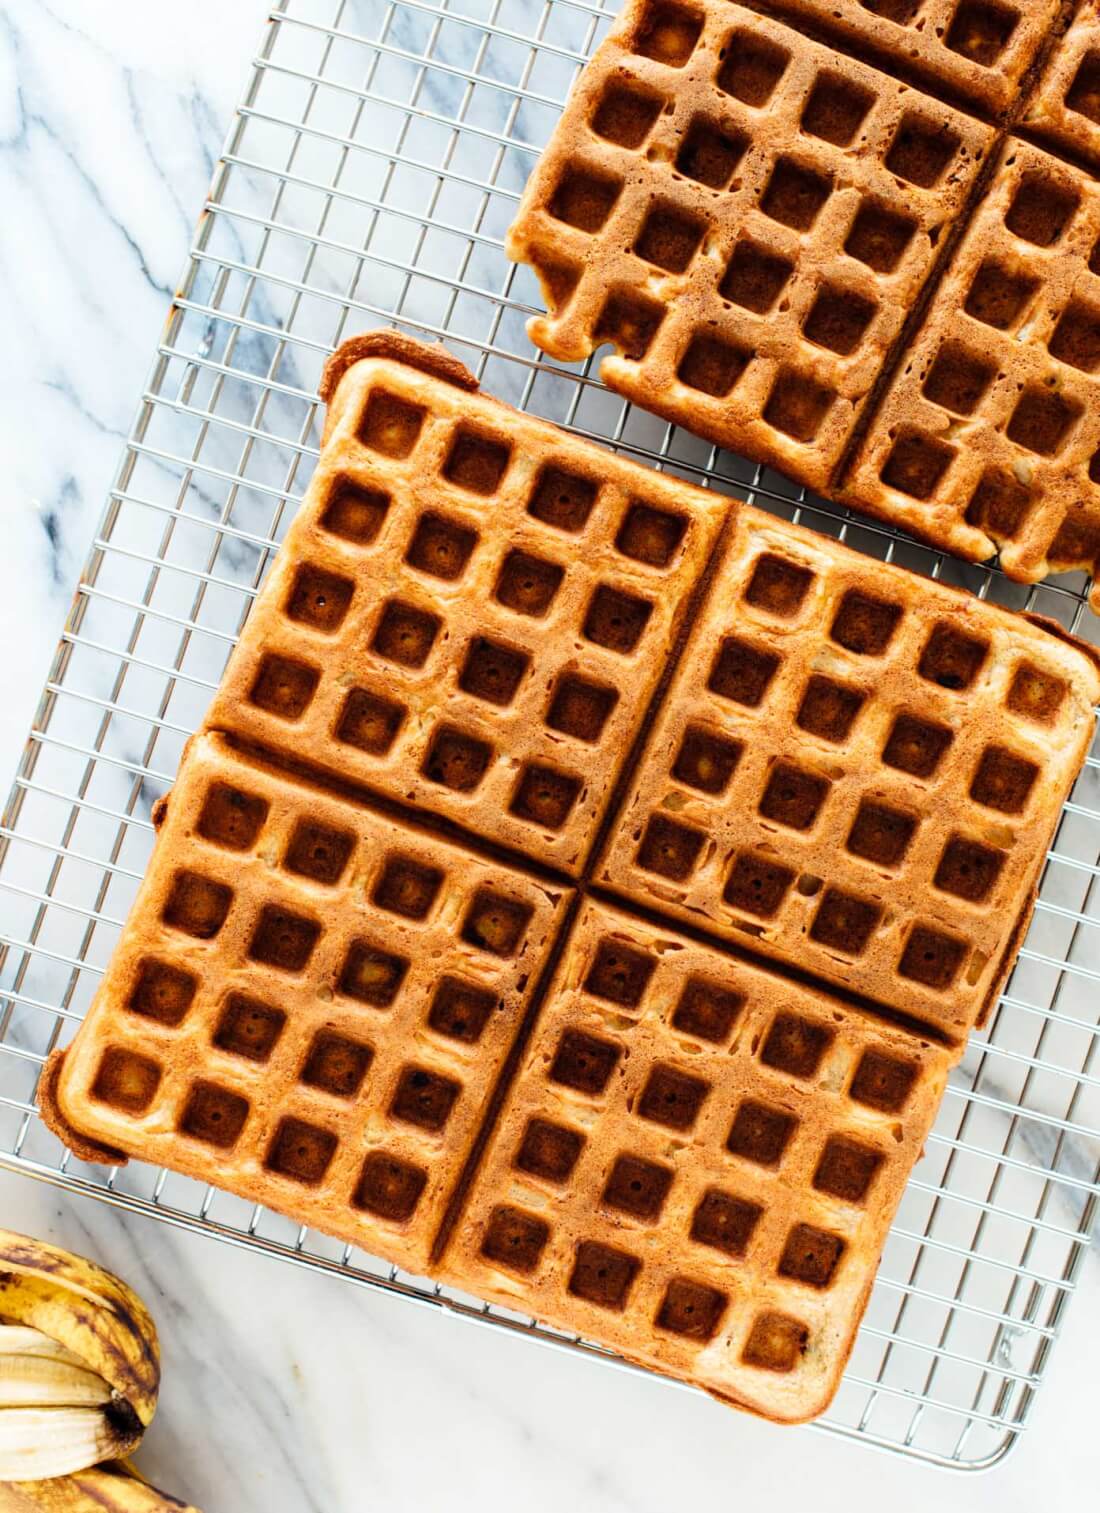 Simple, delicious gluten-free banana waffles! Everyone will love these wholesome waffles. cookieandkate.com